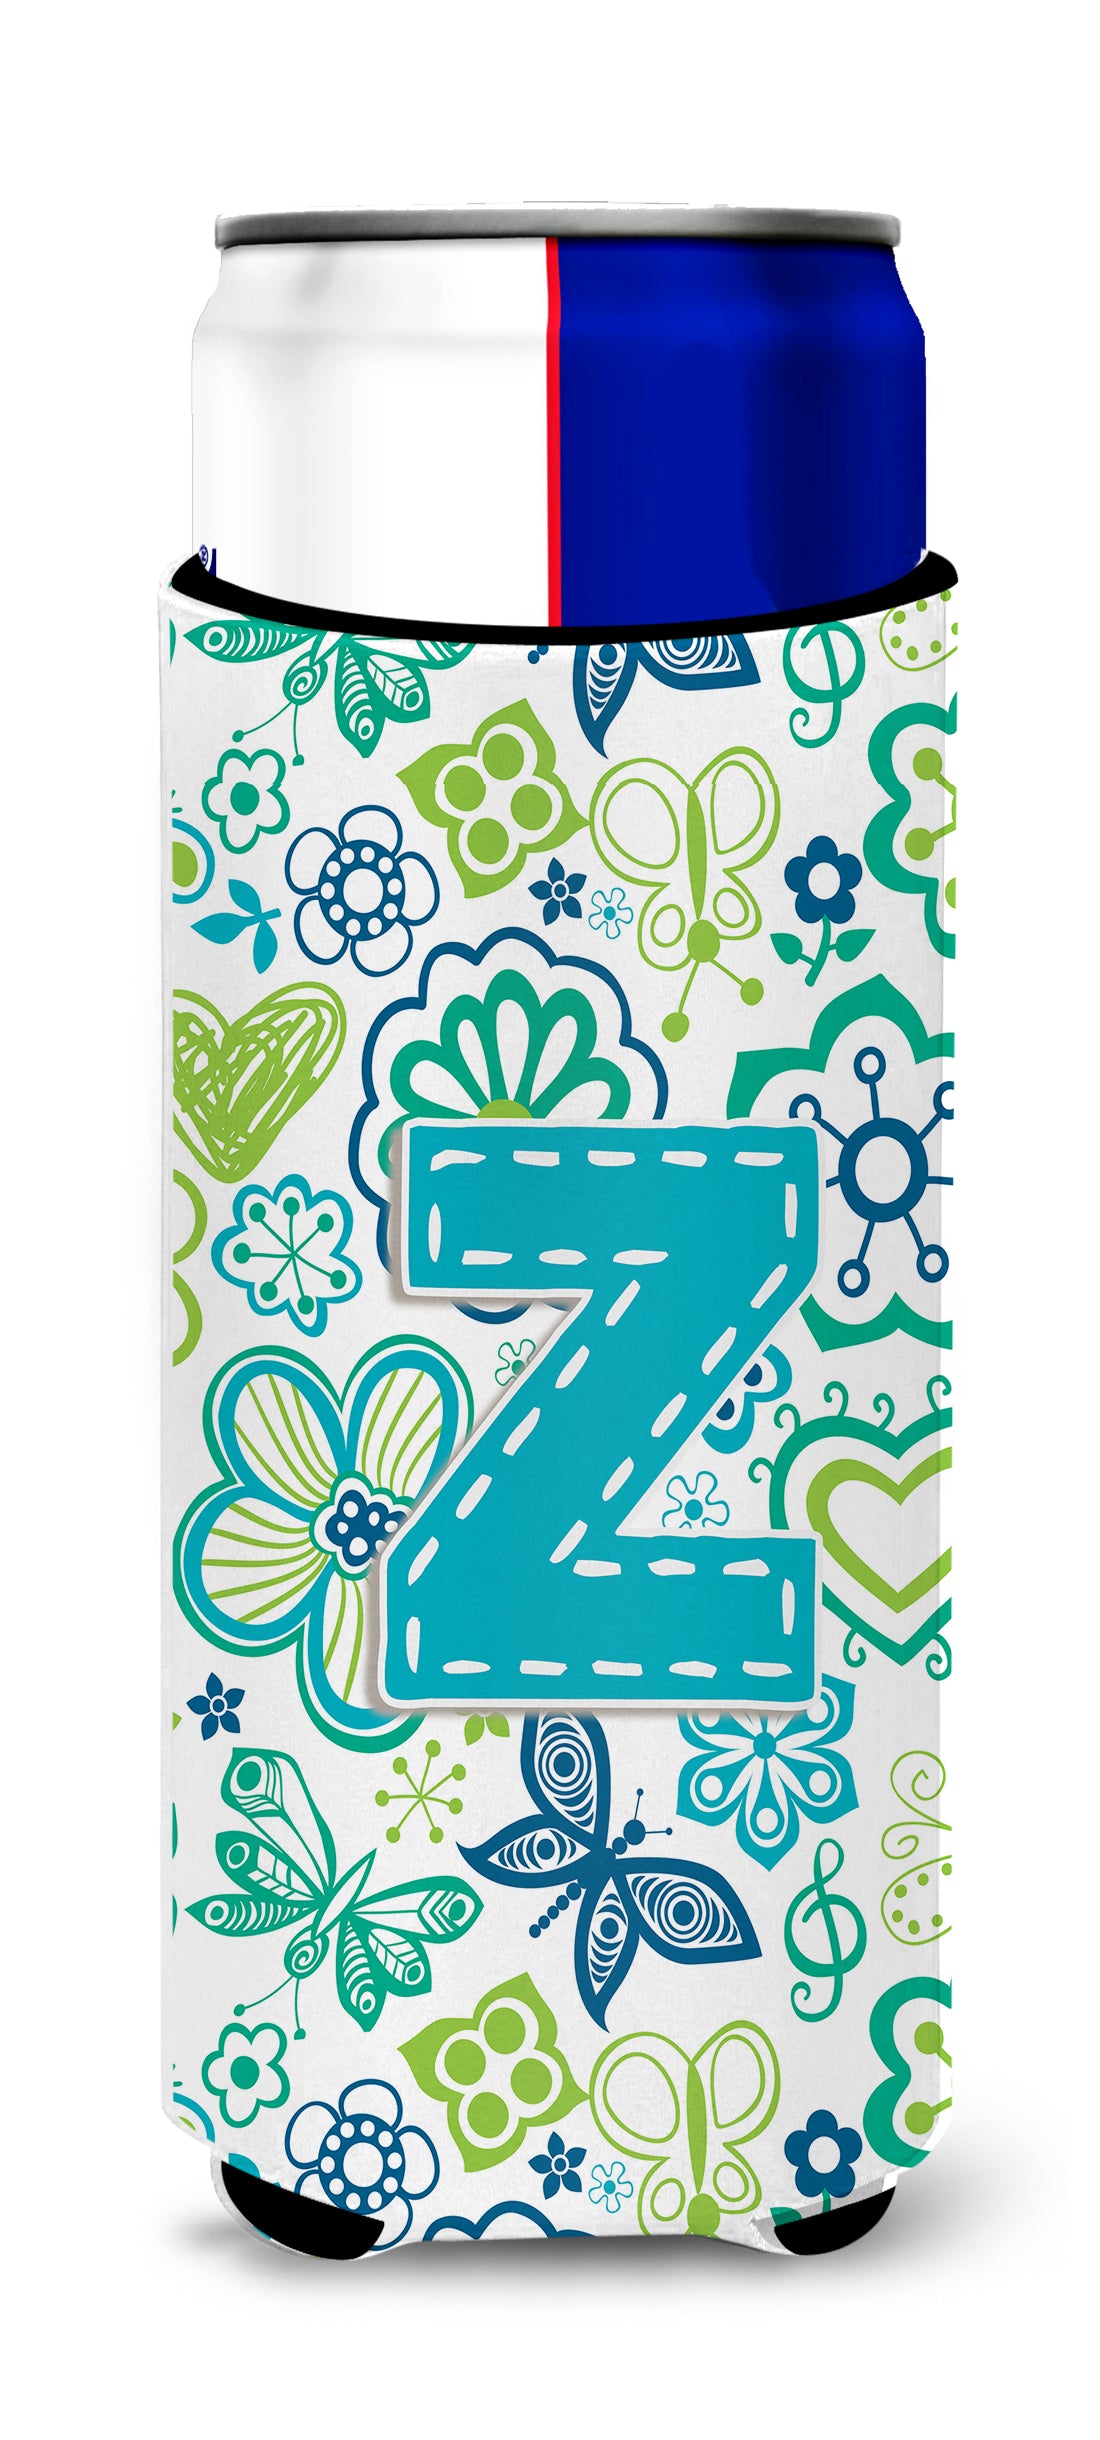 Letter Z Flowers and Butterflies Teal Blue Ultra Beverage Insulators for slim cans CJ2006-ZMUK.